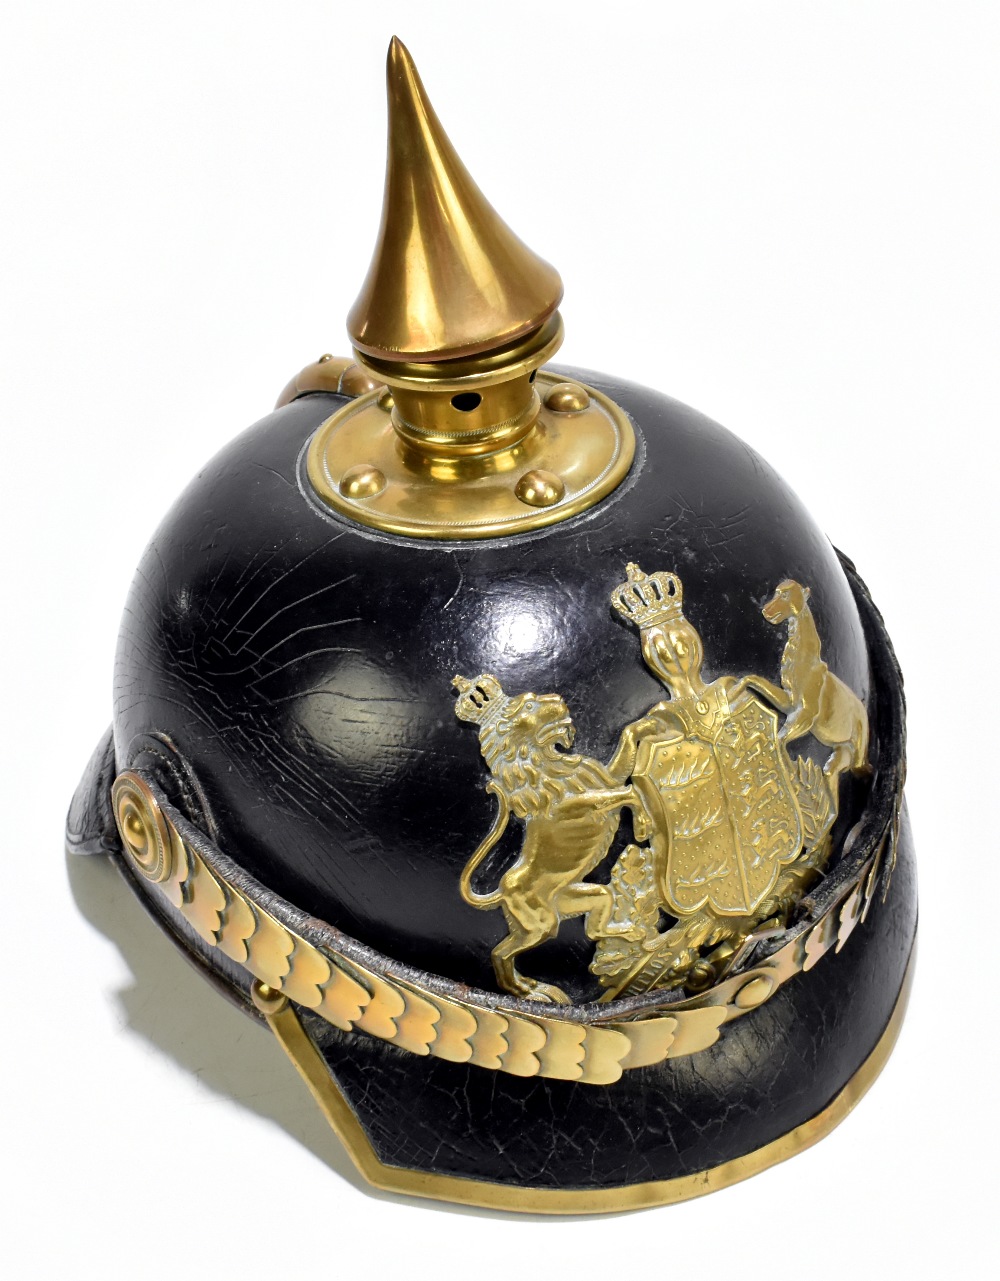 A Prussian WWI leather pickelhaube with applied brass plaque inscribed ‘Furchtlos und trew’, with